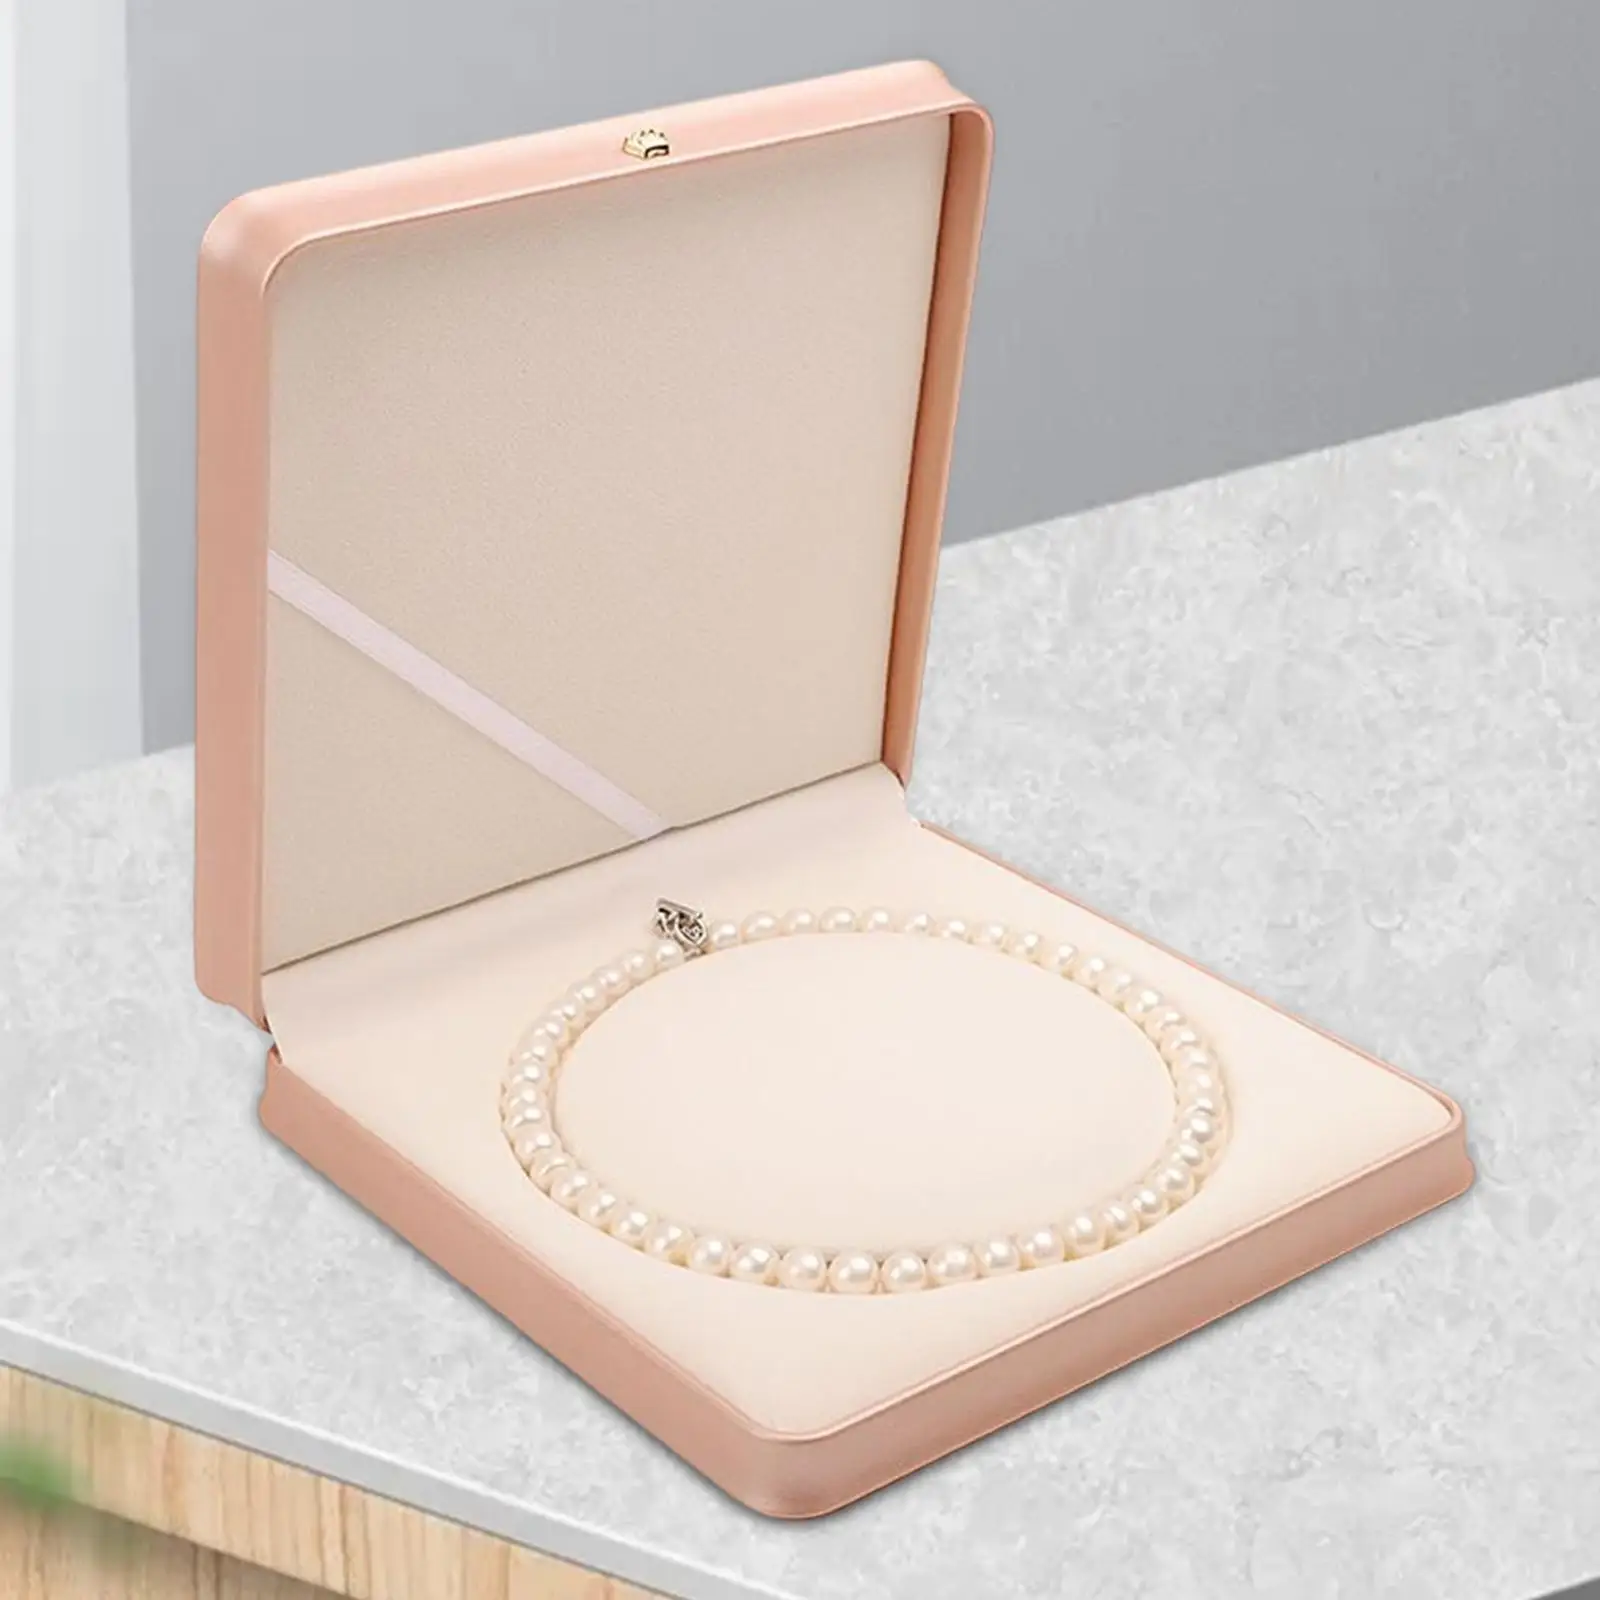 Necklace Box Jewelry Display Box Jewelry Display Case PU Leather for Wedding Proposal